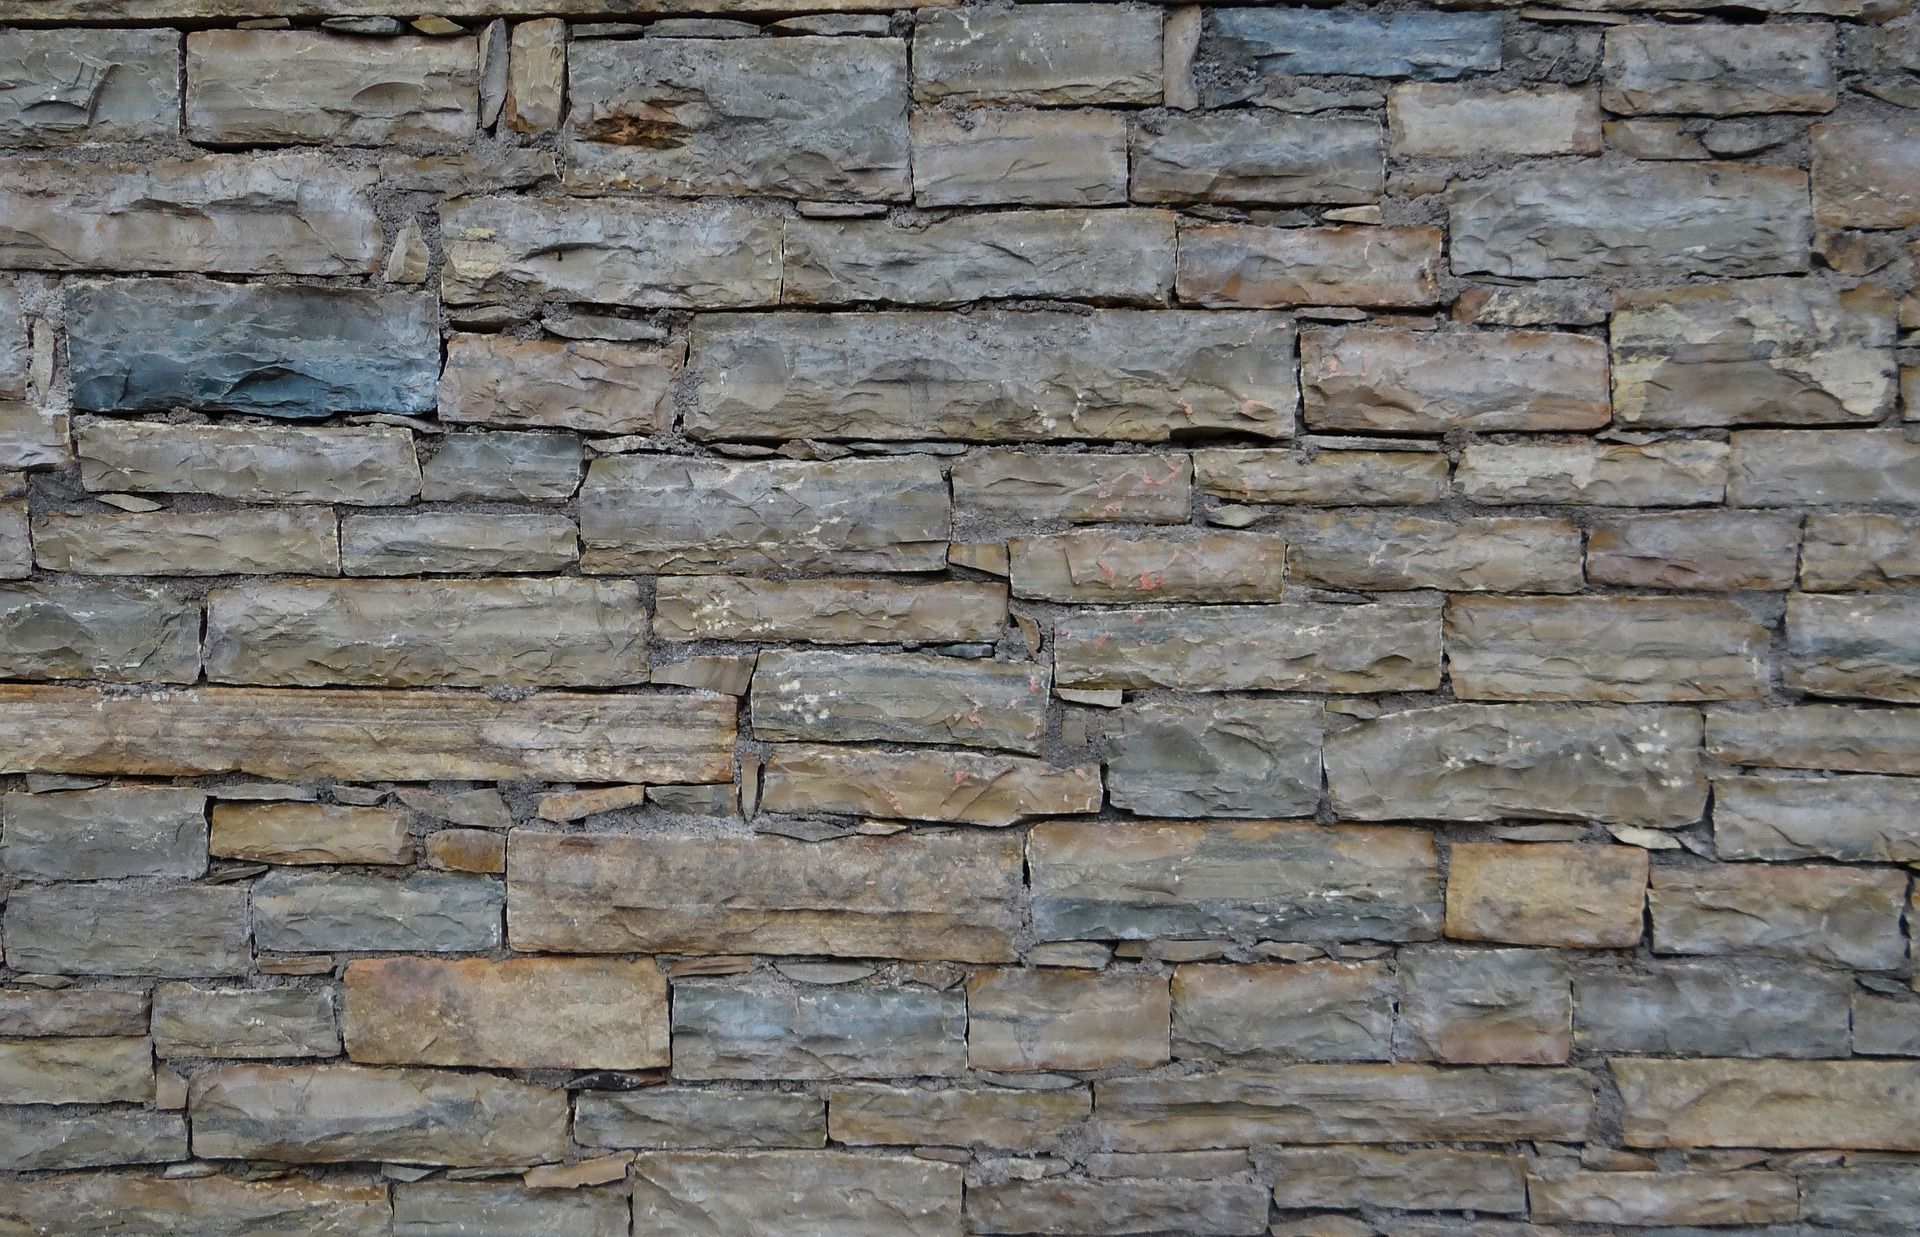 Natural stone is one of the most popular materials used both indoors and outdoors. But how is it mad